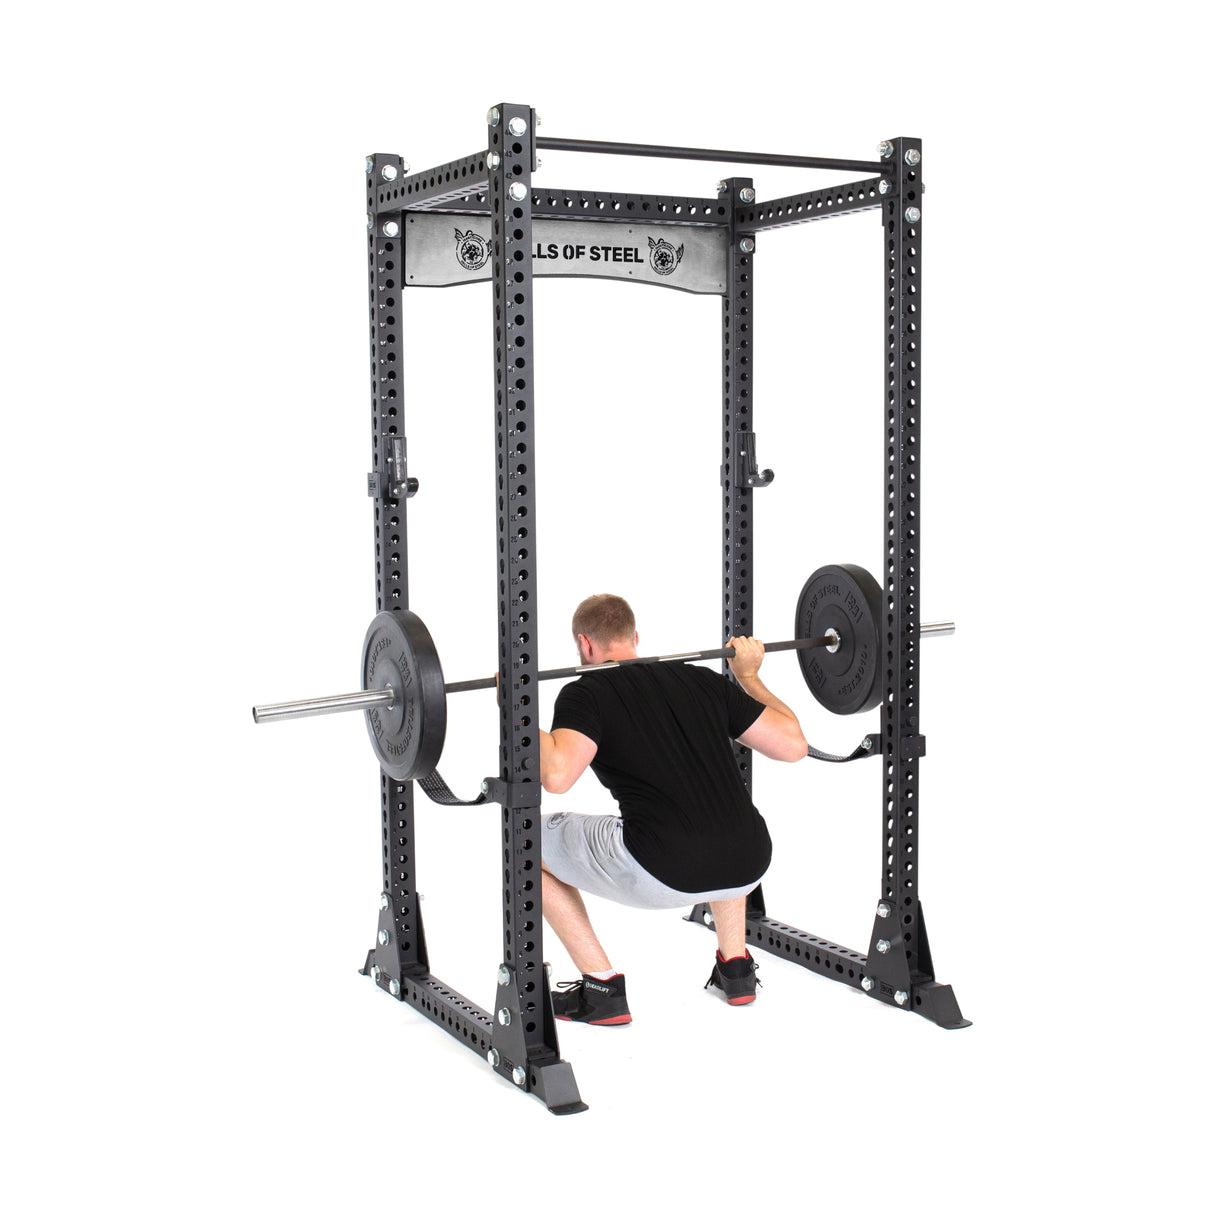 product picture of Manticore Flat Foot Power Rack PREBUILT with male model performing squats